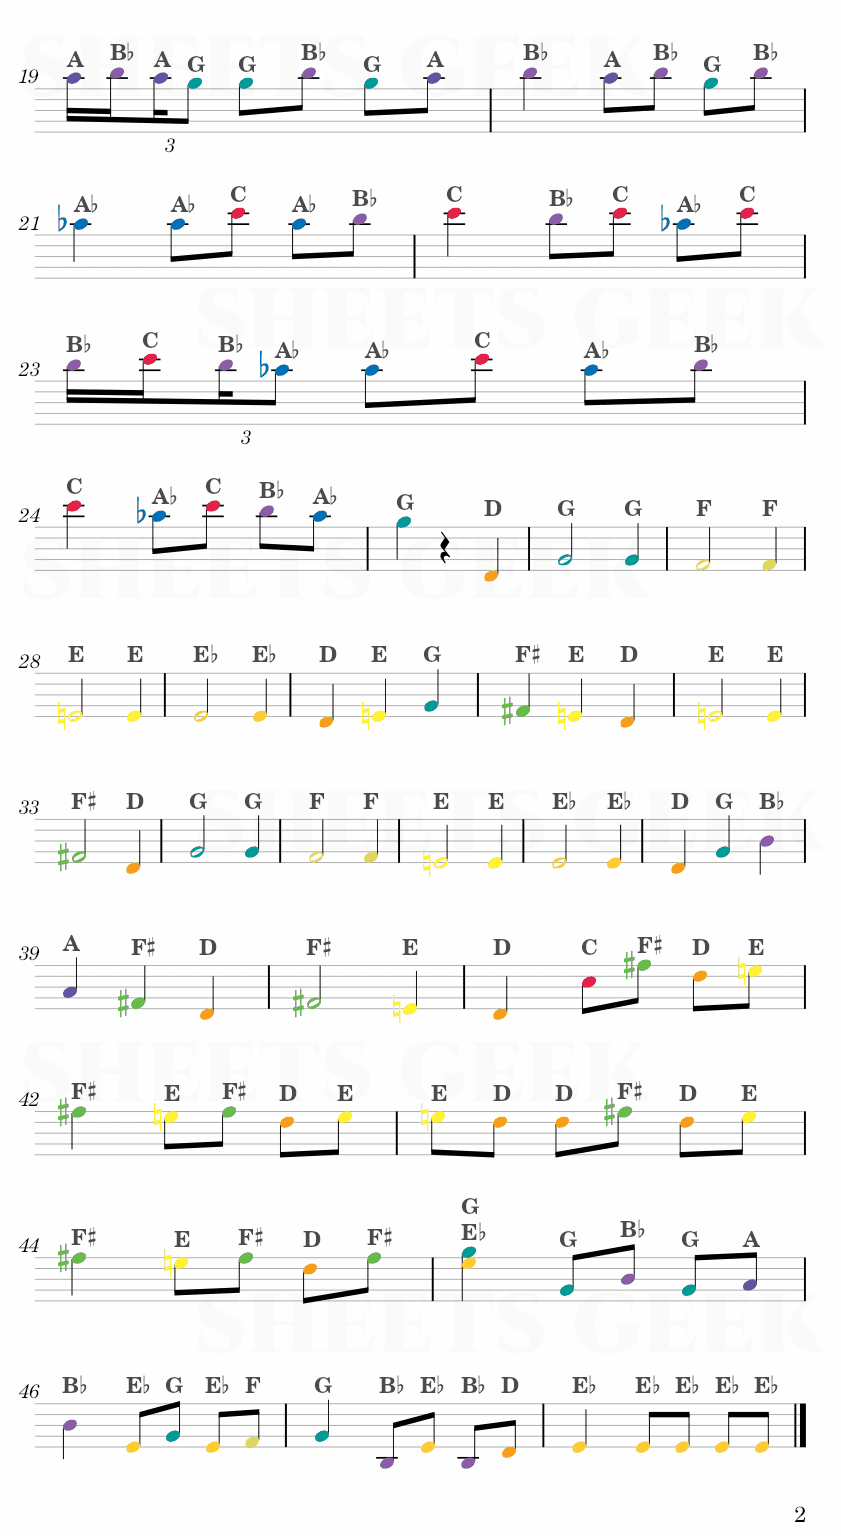 Danse Macabre - Camille Saint-Saëns Easy Sheet Music Free for piano, keyboard, flute, violin, sax, cello page 2